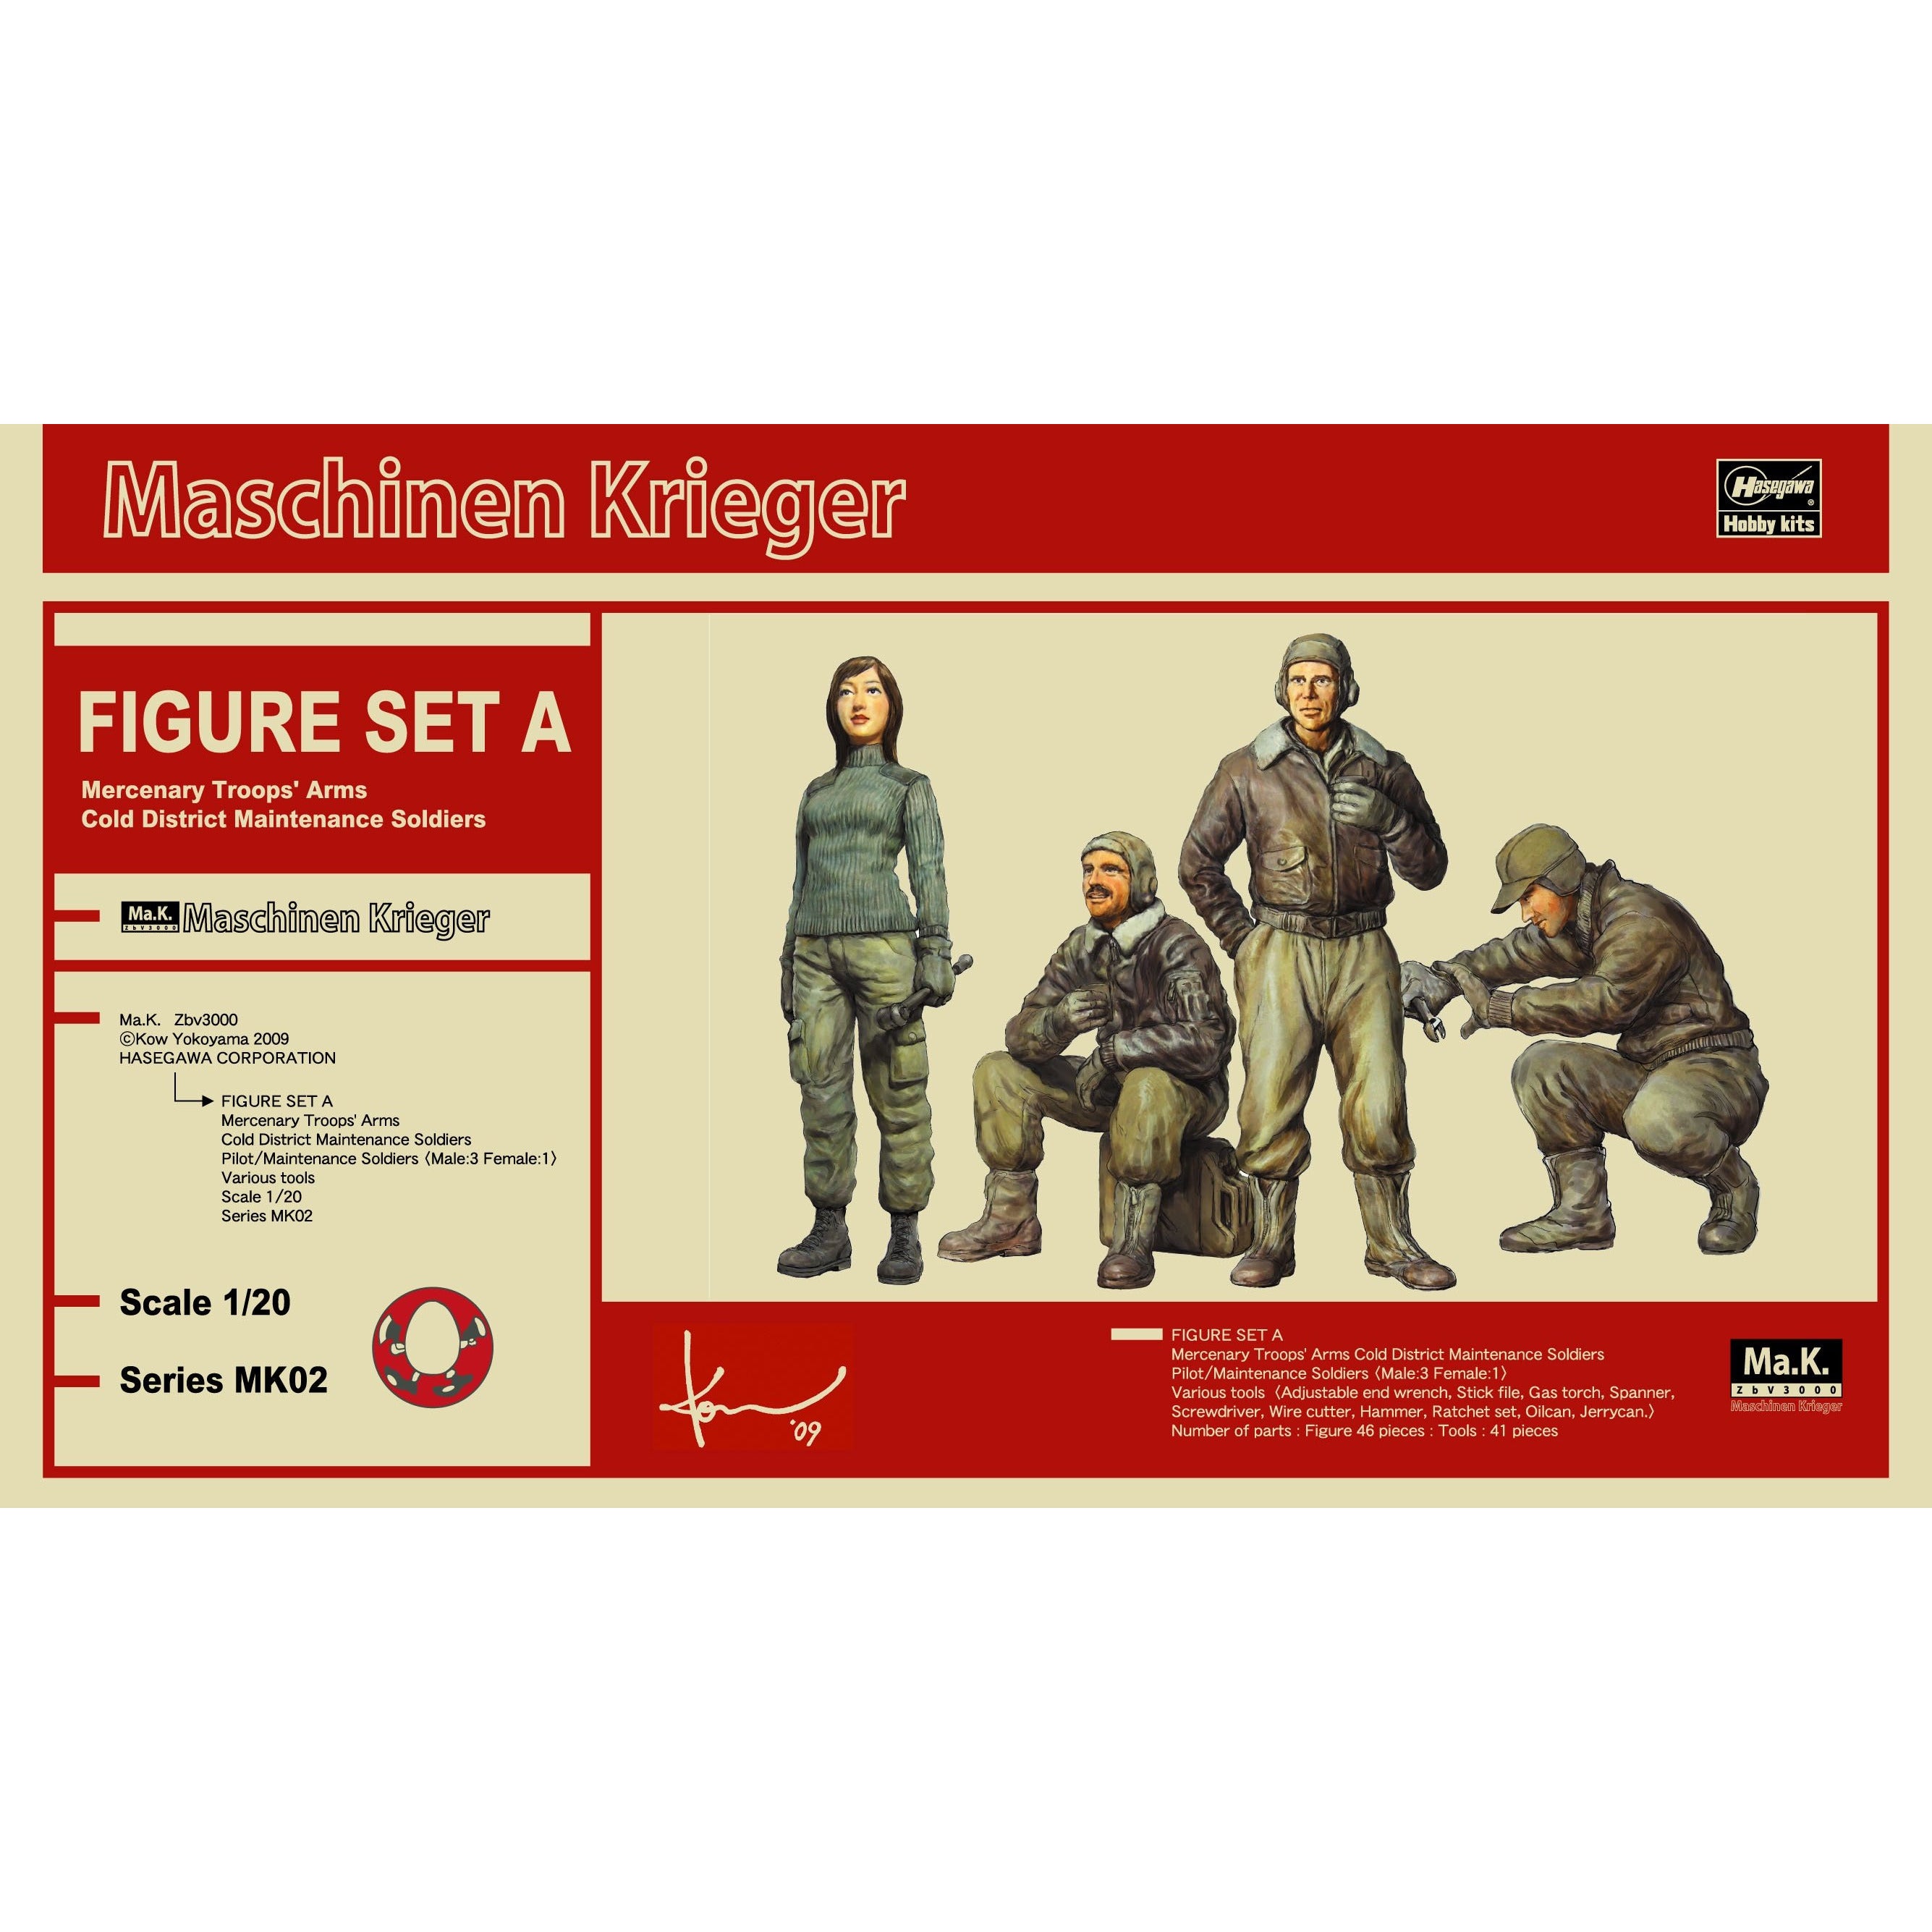 Ma.K. Figure Set A (Mercenary Troops' Arms Cold District Maintenance Soldiers) MK02 1/20 #64002 by Hasegawa